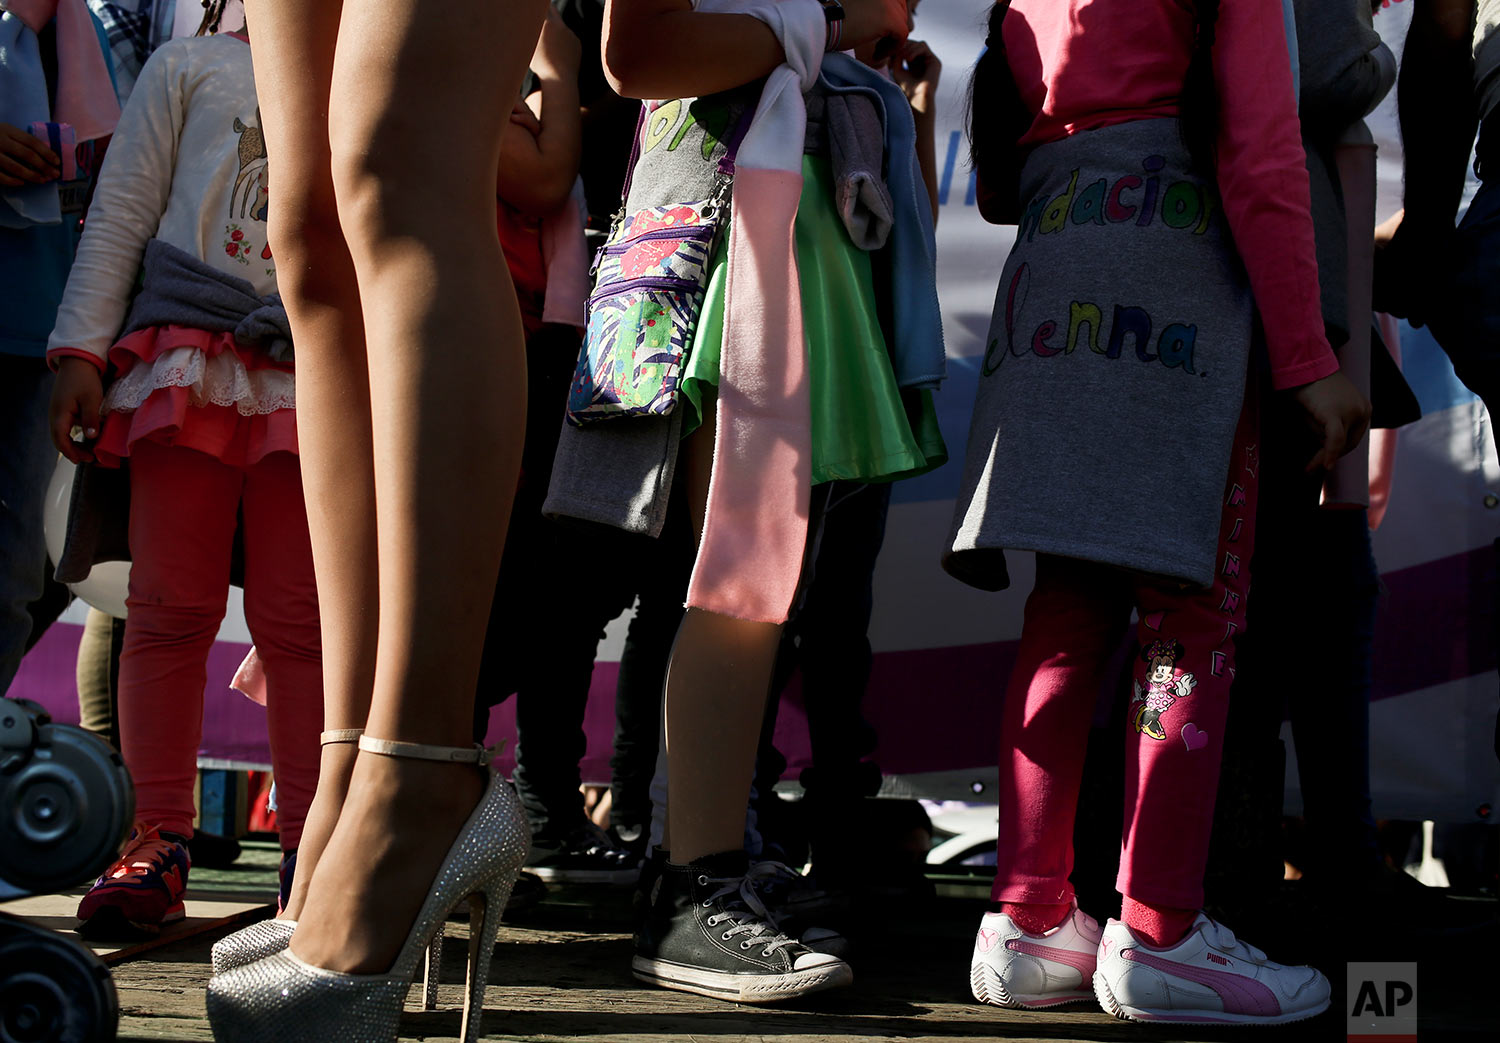  In this July 1, 2017 photo, transgender girls stand by a transvestite during a Gay Pride march in Santiago, Chile. The center-left government has been pushing an array of measures for gender rights, ranging from decriminalizing some abortions to dem